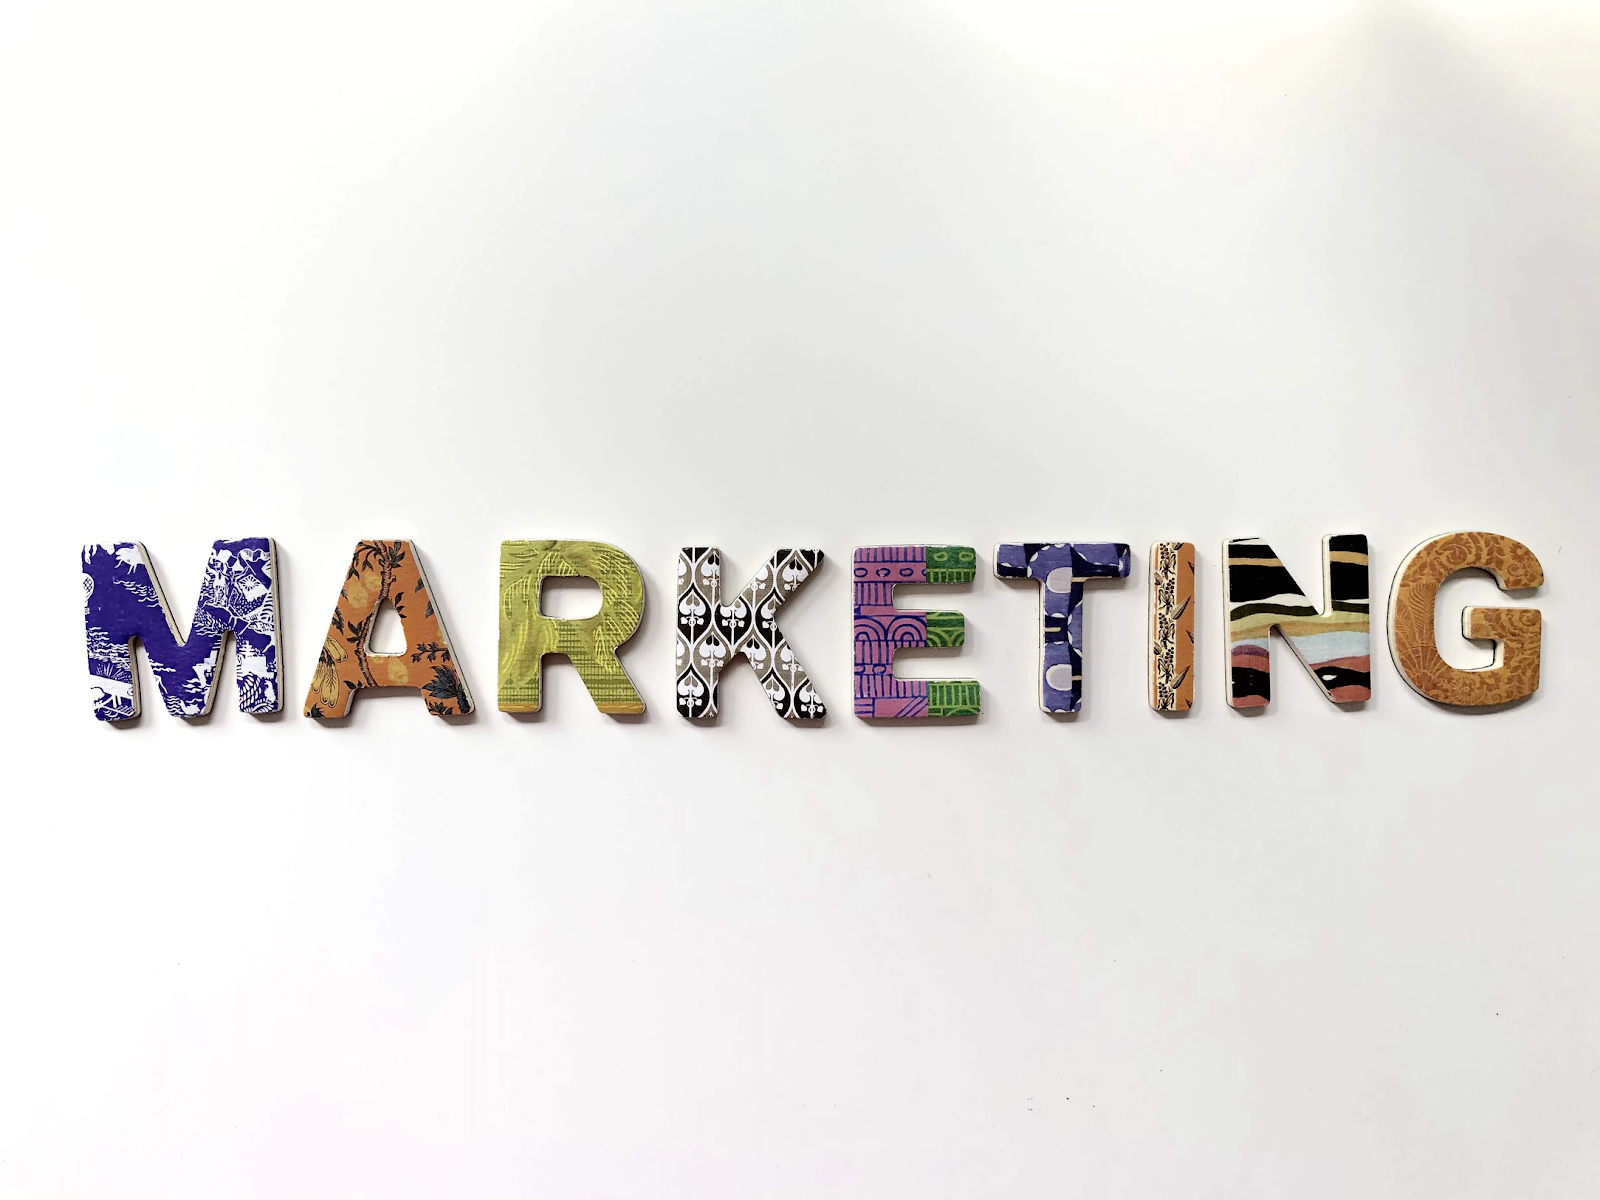 10 Questions To Ask For Better Marketing